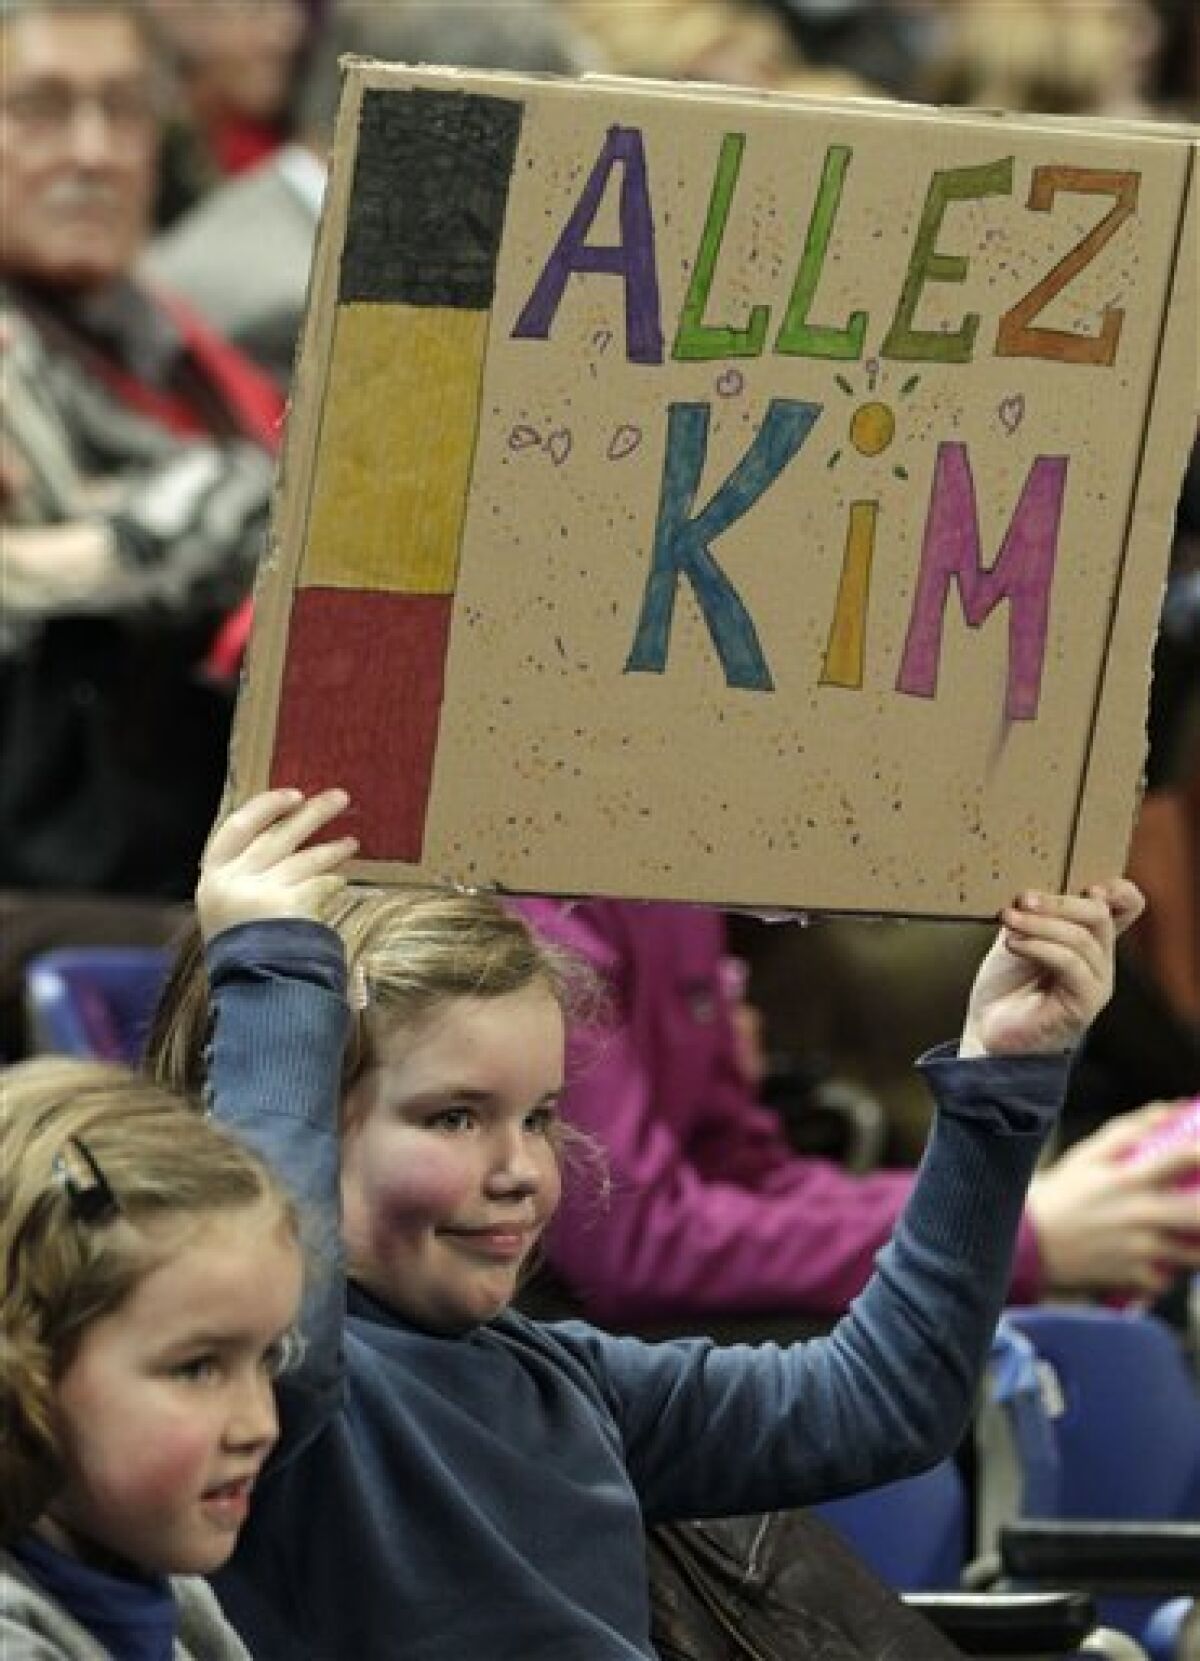 A young supporter of Belgium's Kim Clijsters holds up a placard during the World Group Fed Cup match Belgium versus USA, in Antwerp, Belgium, Saturday, Feb. 5, 2011. Belgium leads on the first day 2-0. (AP Photo/Yves Logghe)